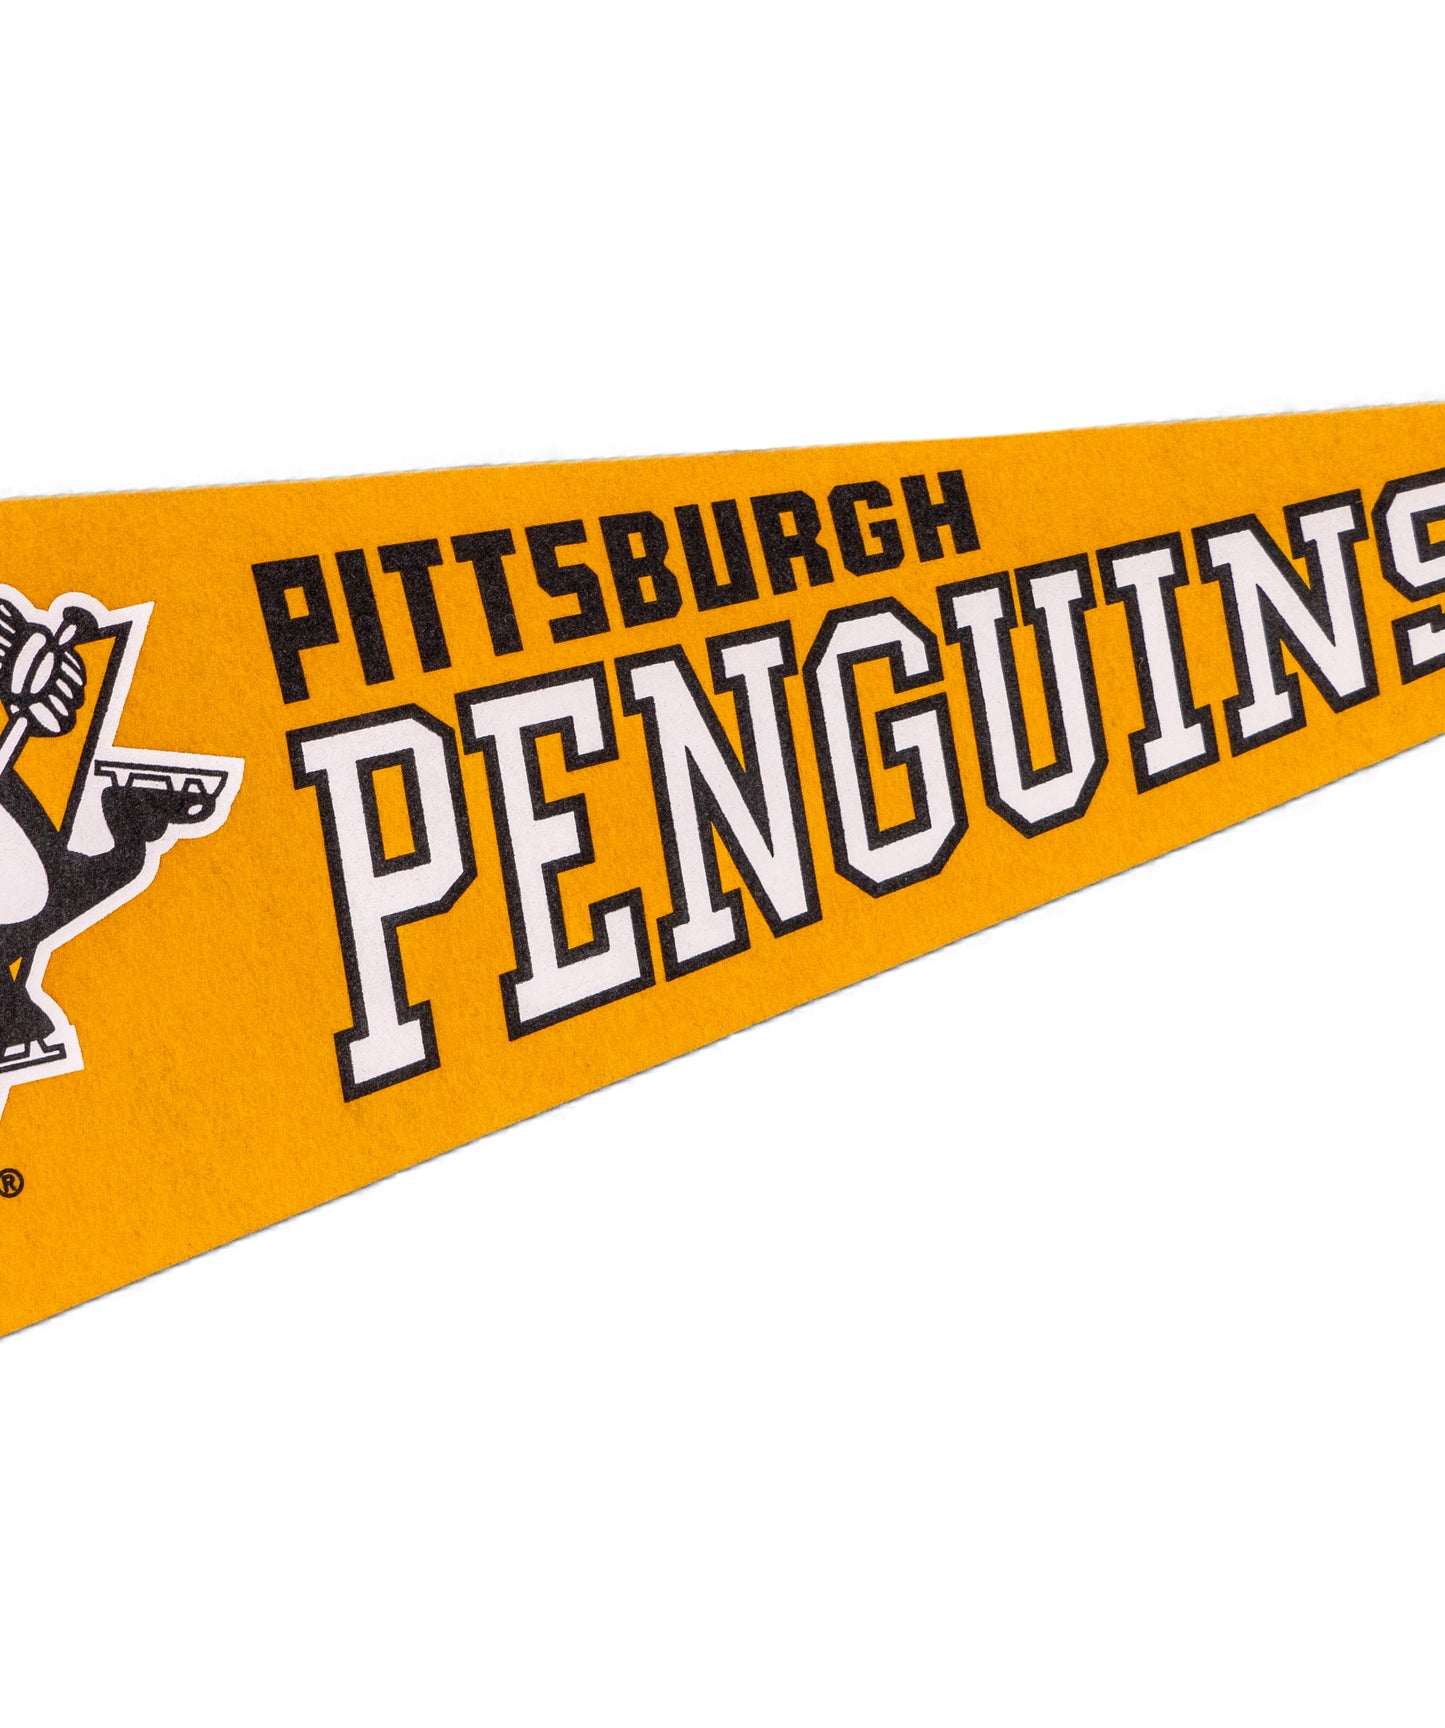 Pittsburgh Penguins Pennant • NHL x Oxford Pennant